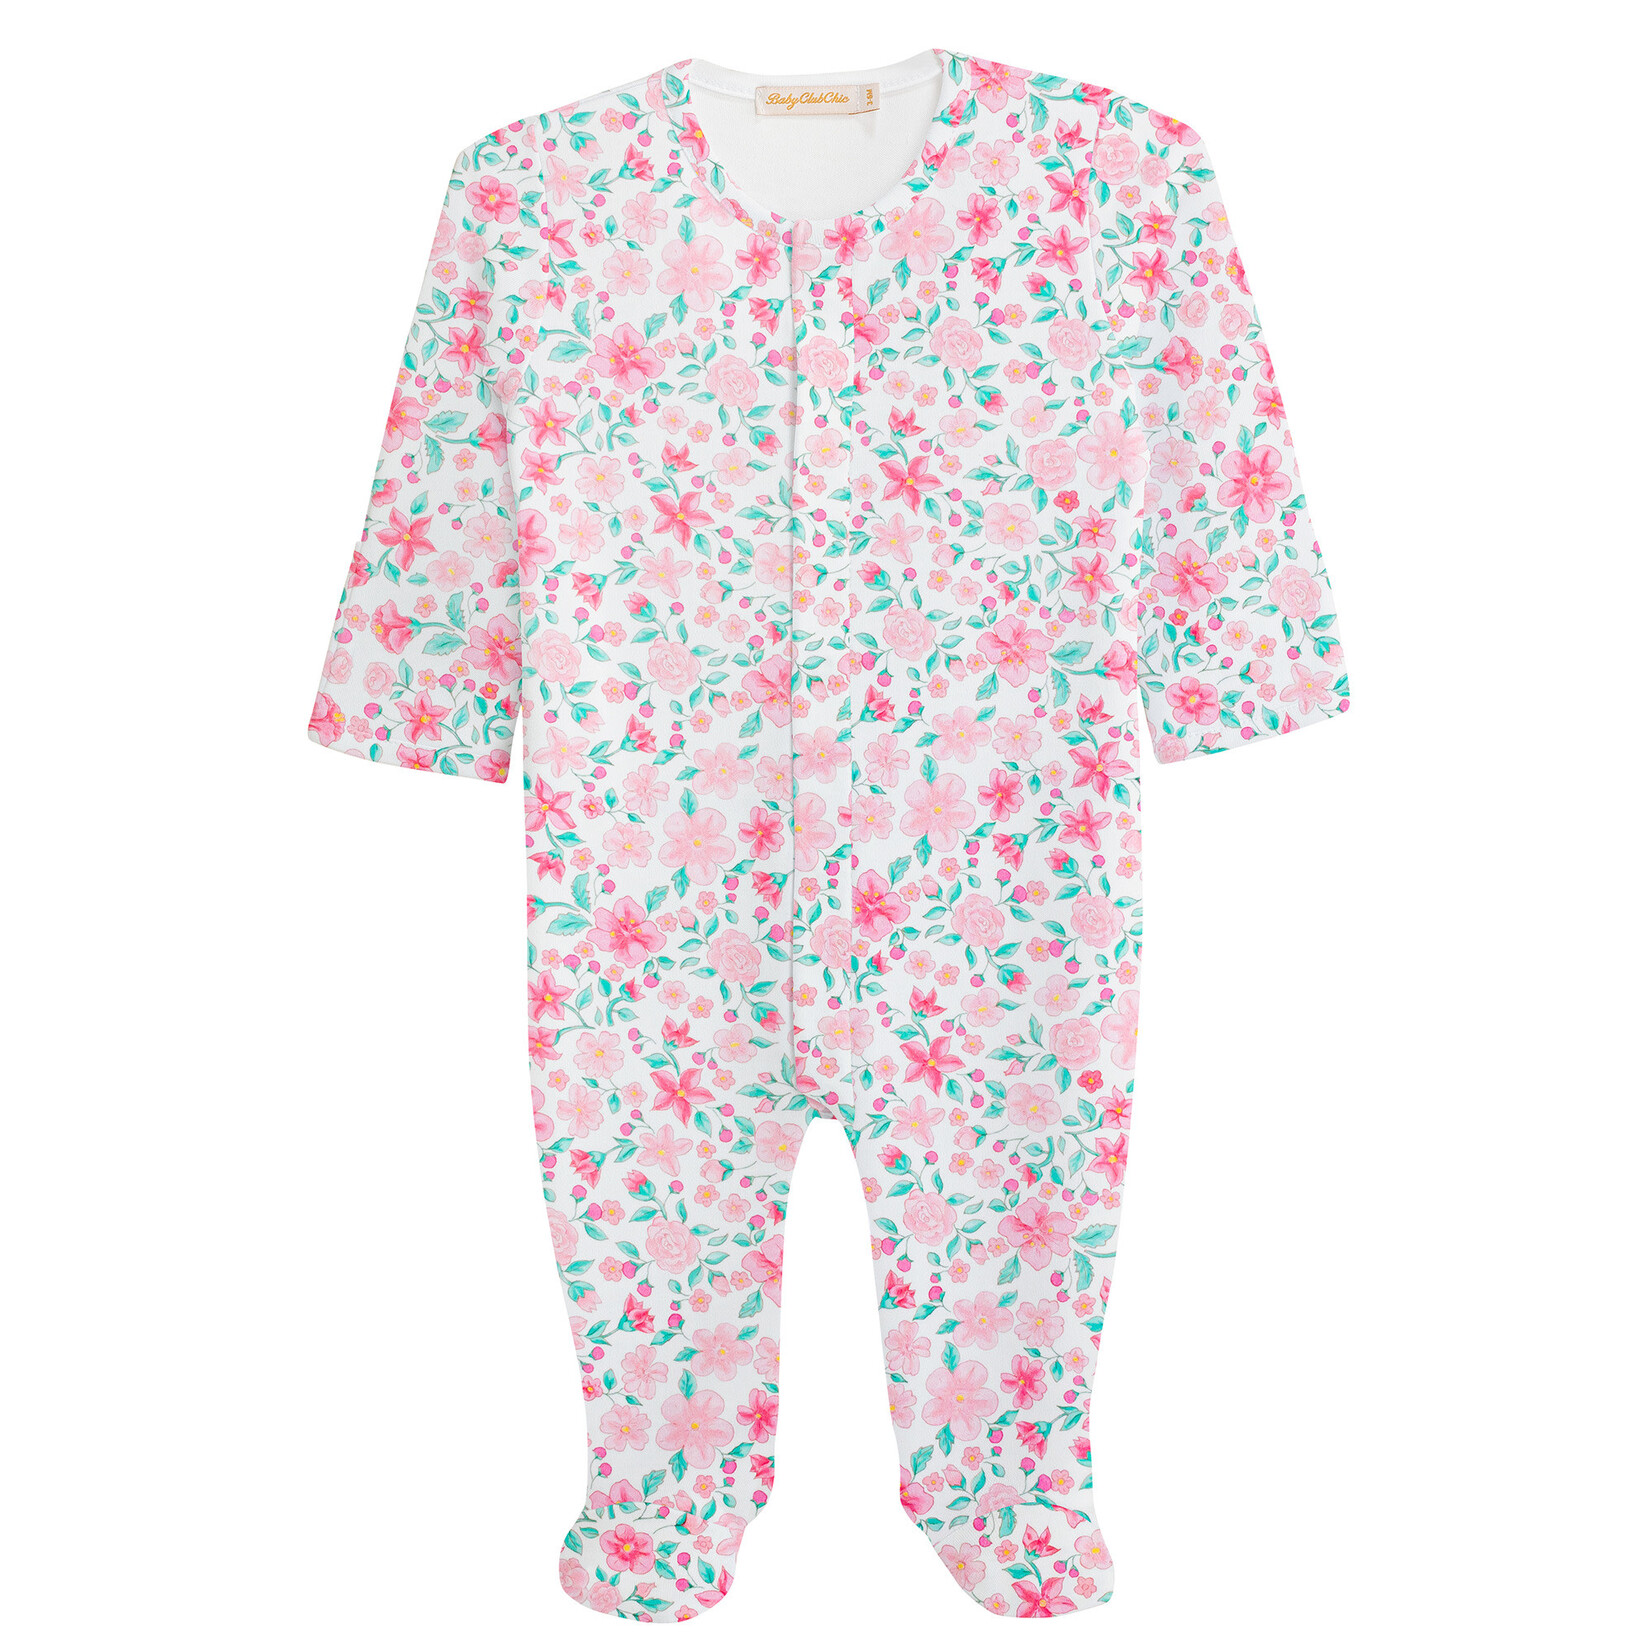 Baby Club Chic Blossom in Pink Footie